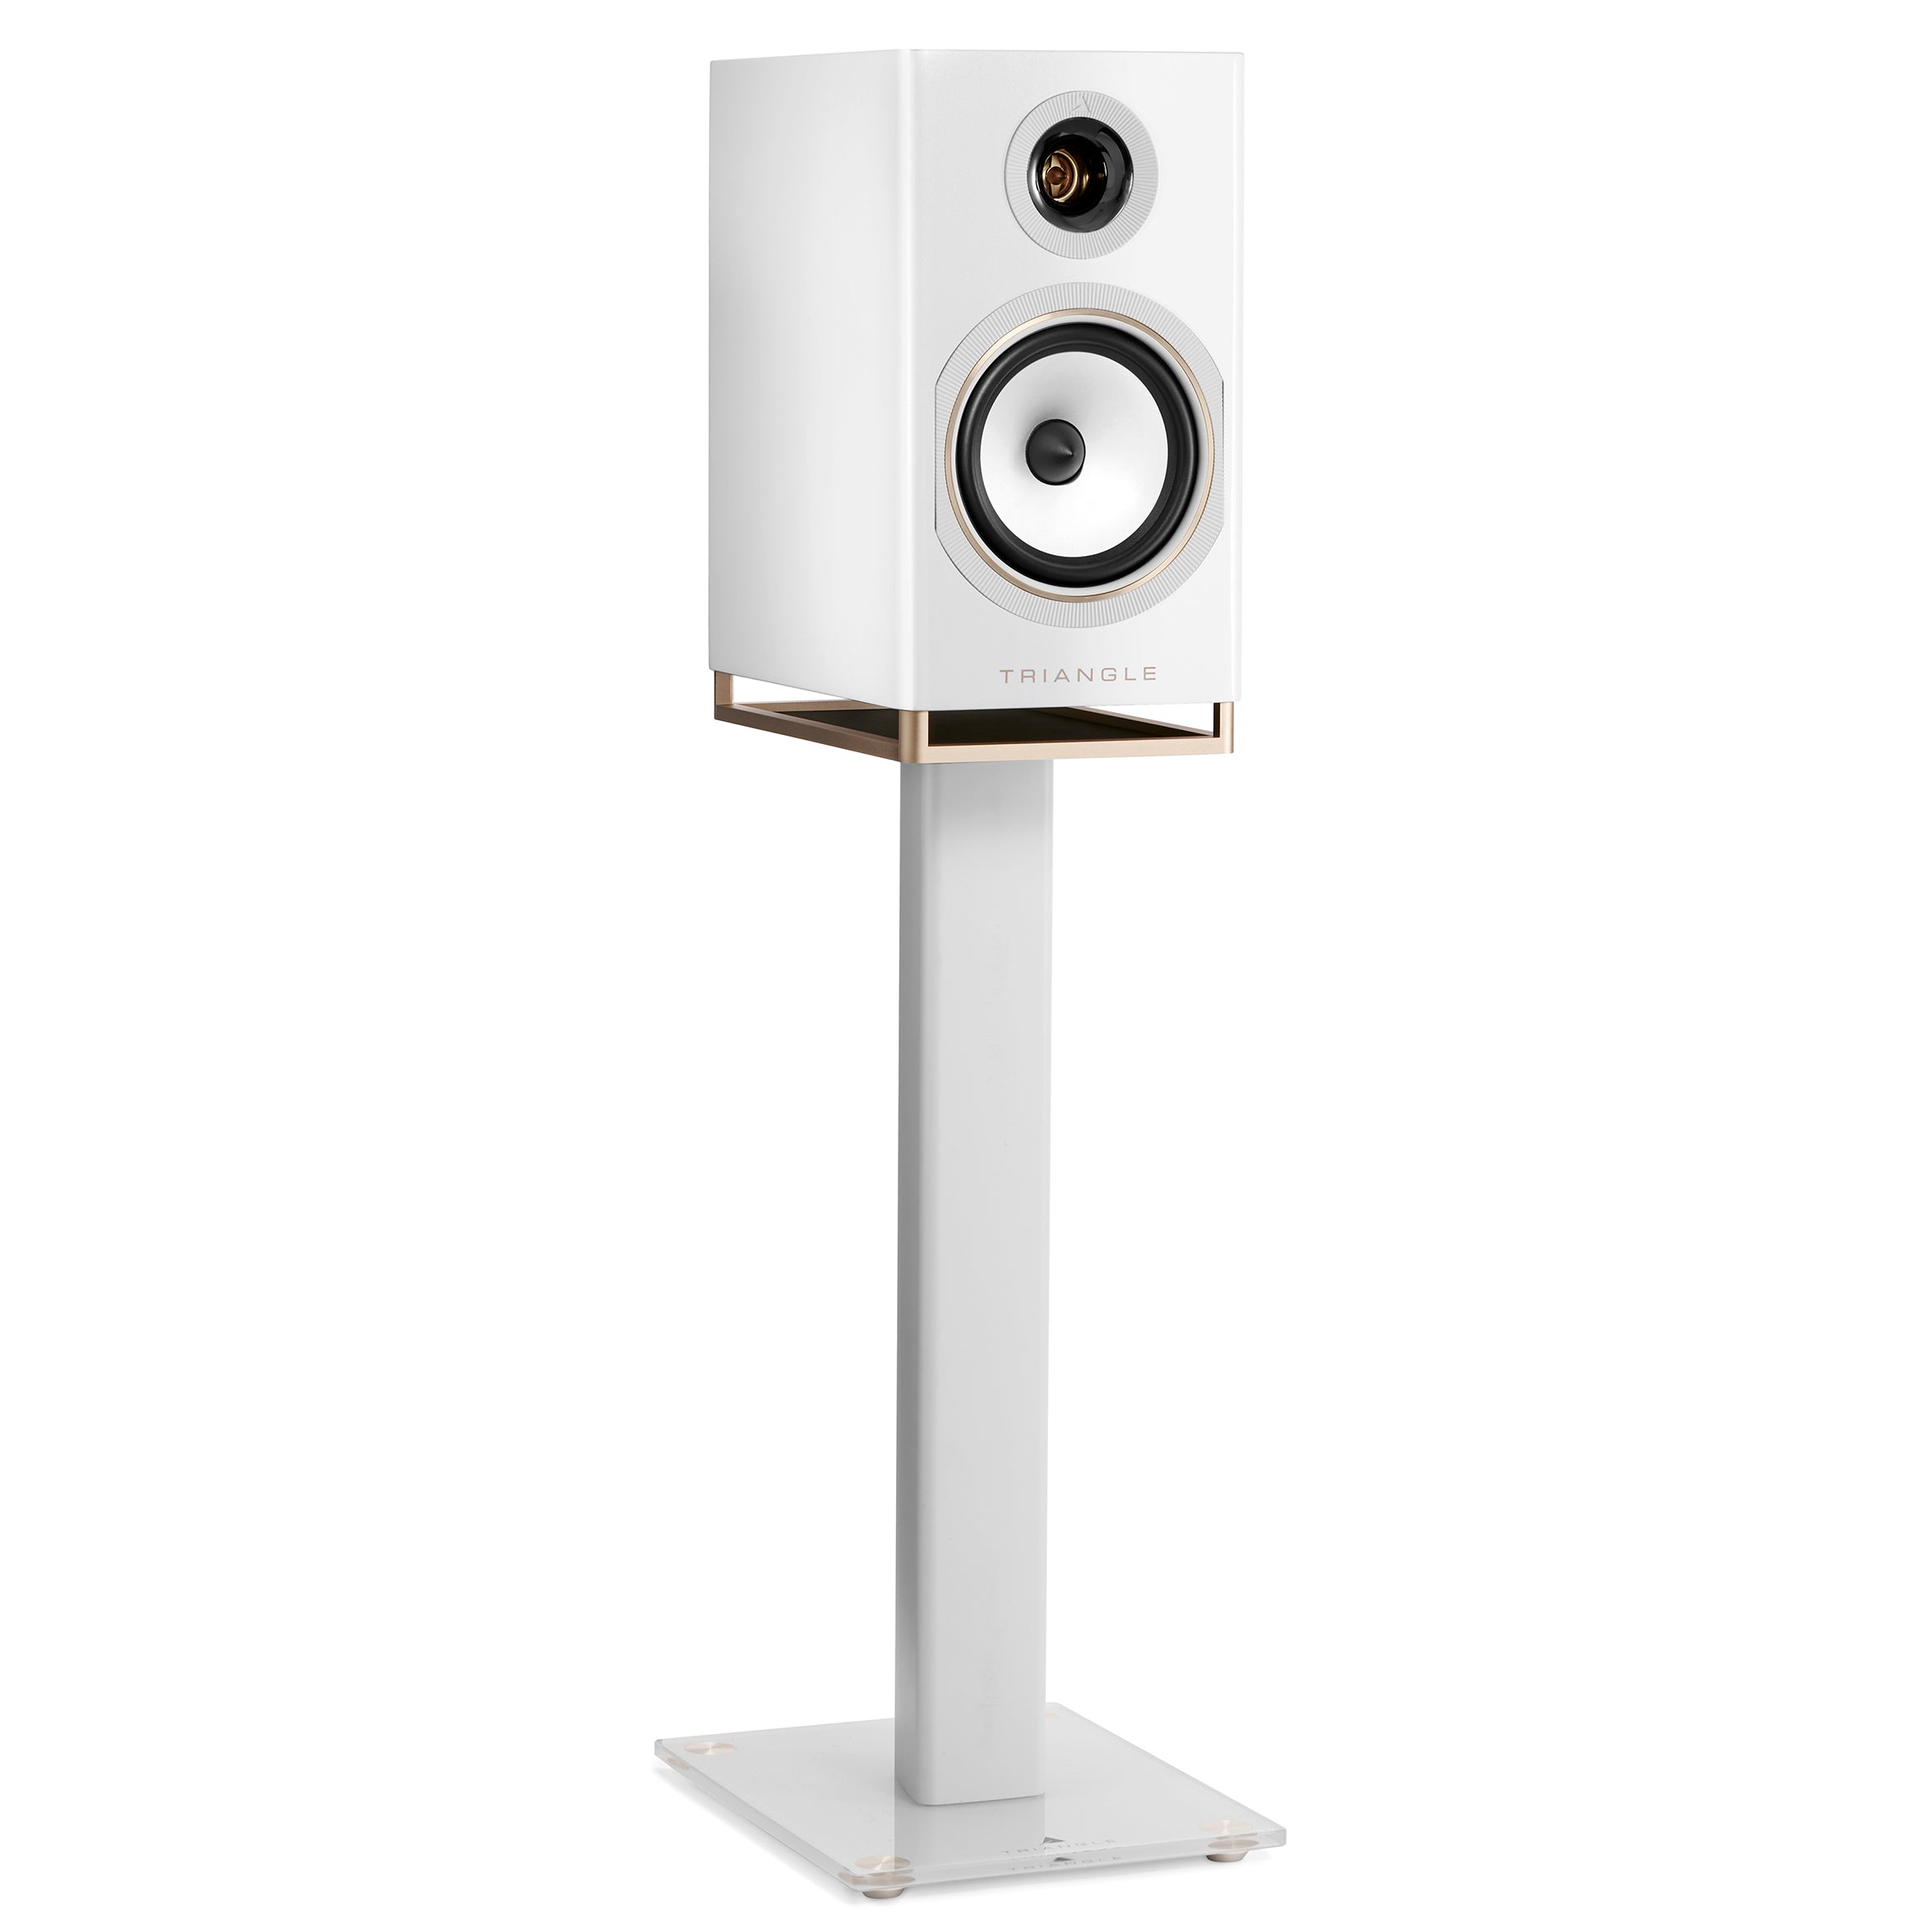 triangle-capella-enceinte-active-wifi-bluetooth-haut-de-gamme-stereo-hub-wisa-streaming-musique-pictures-packshot-blanc-sideral-space-white-supports-s05